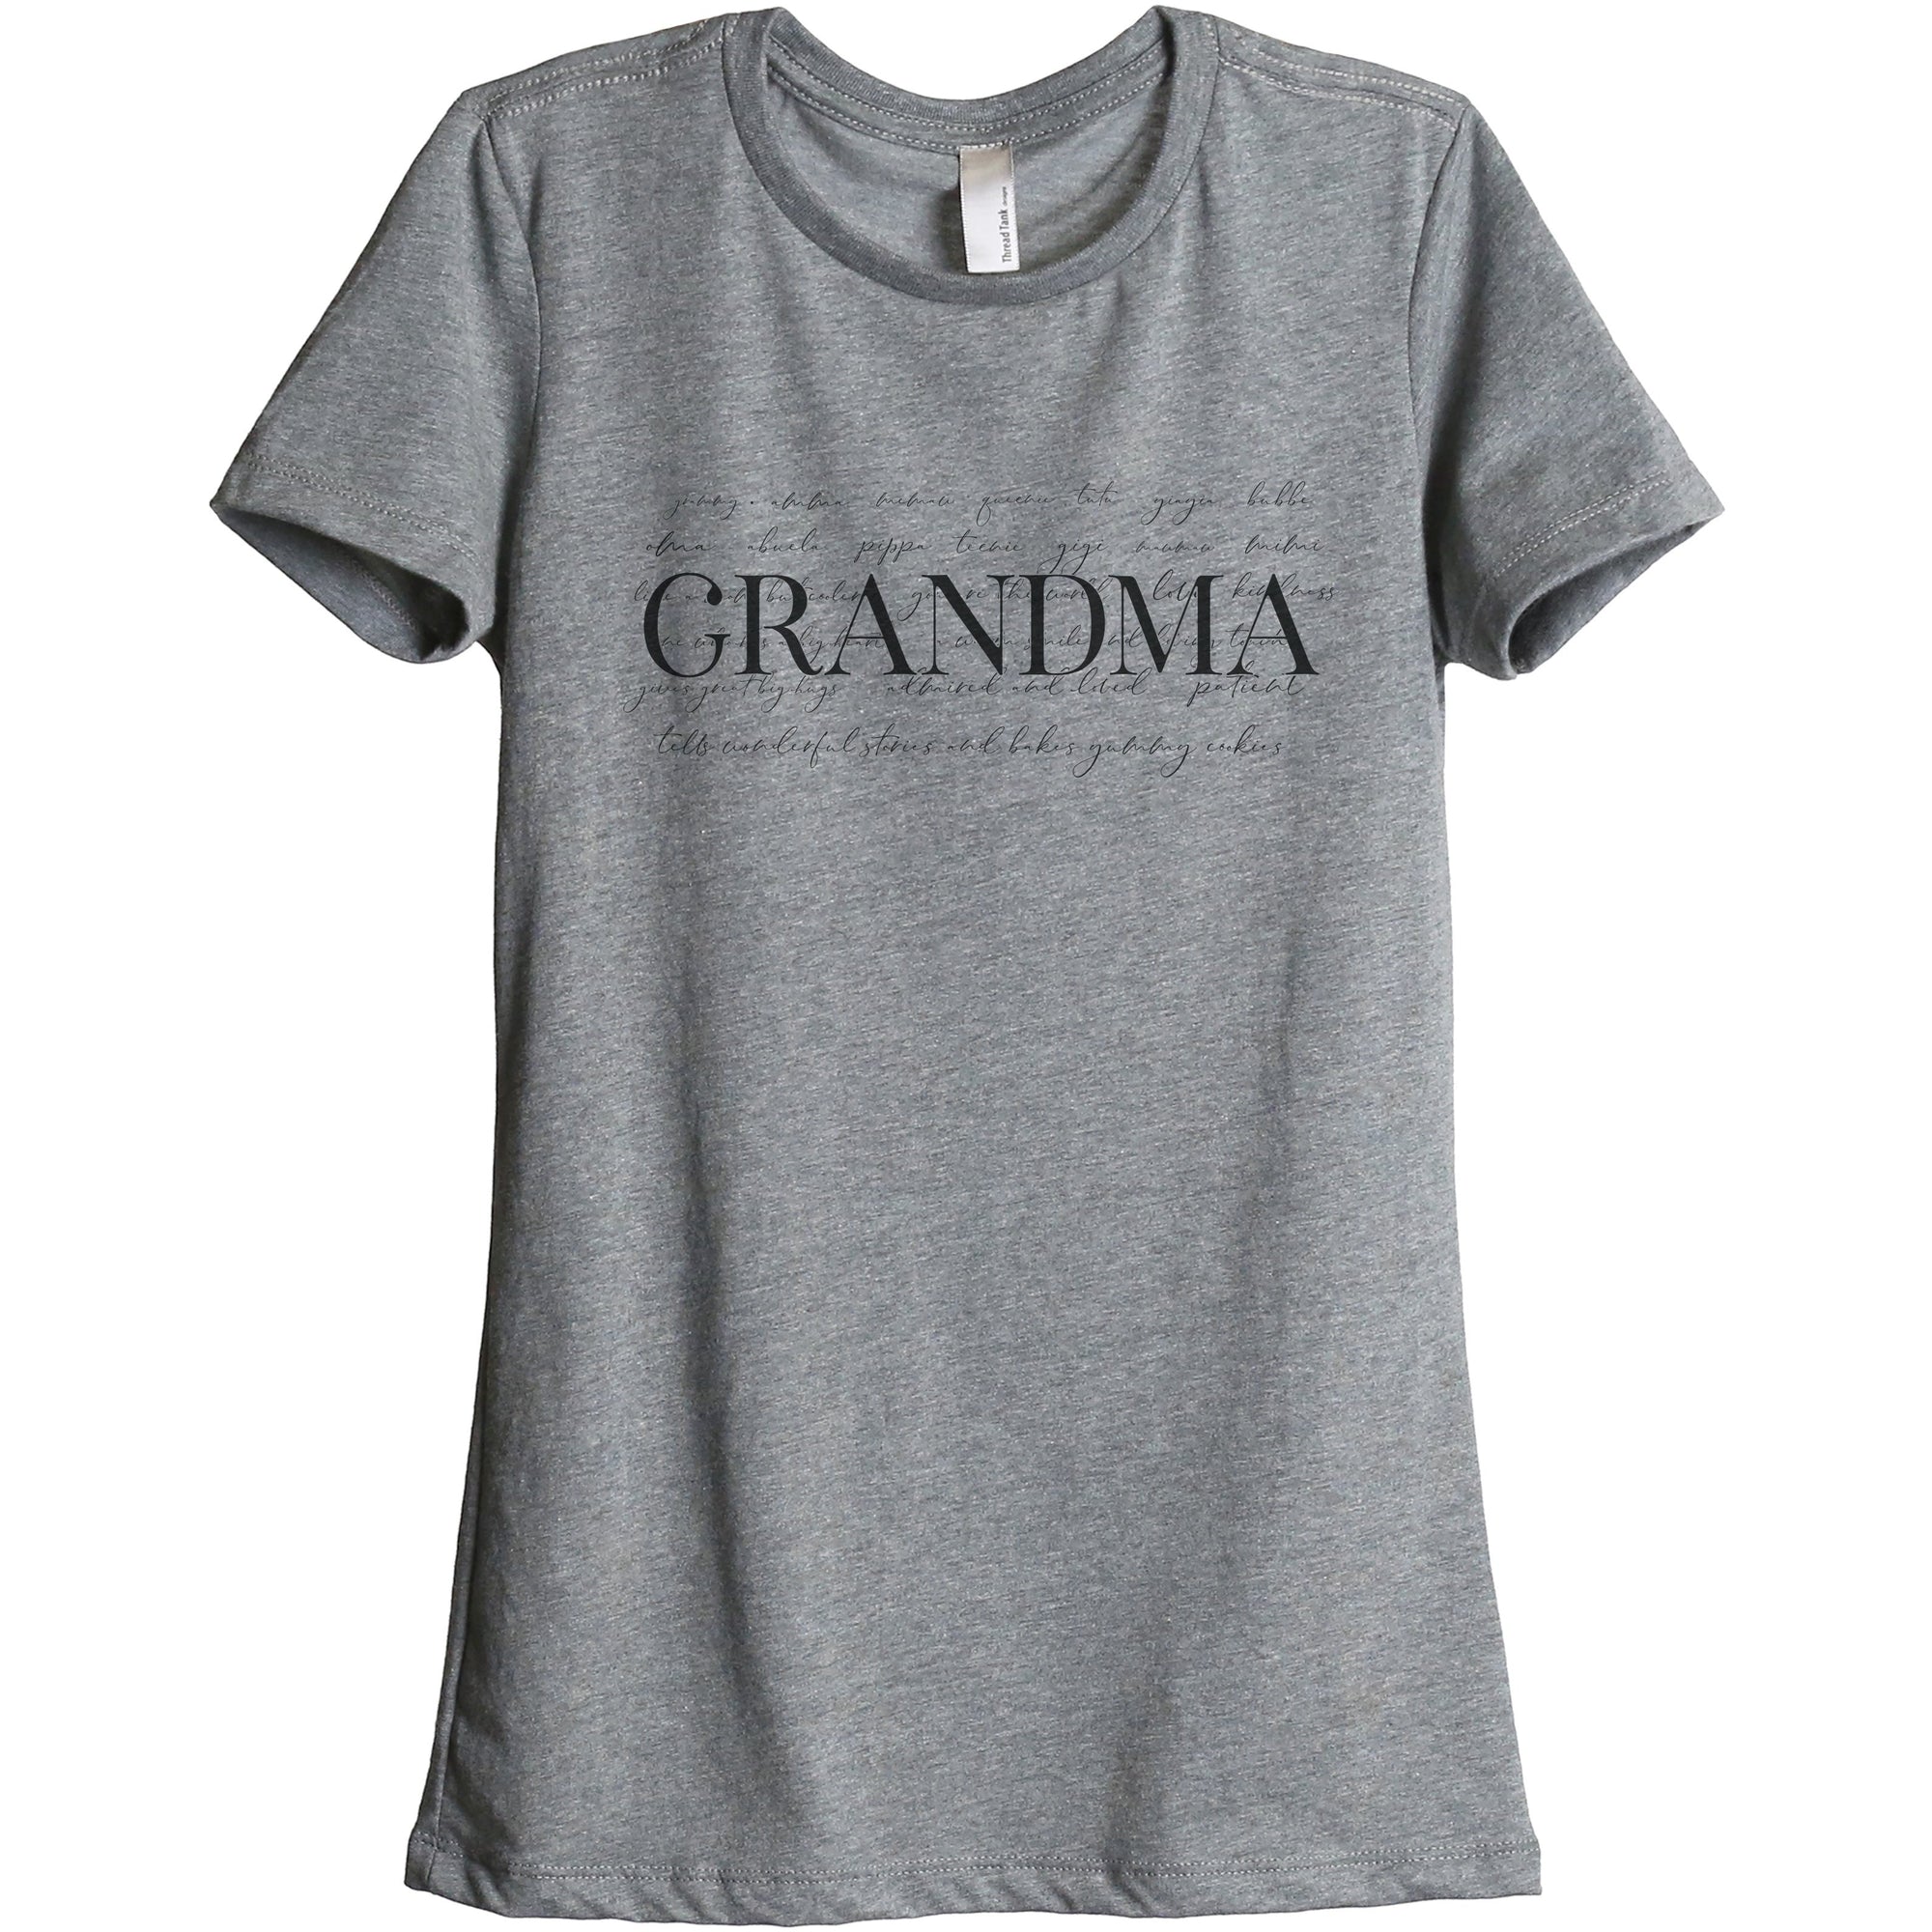 What Is A Grandma - Stories You Can Wear